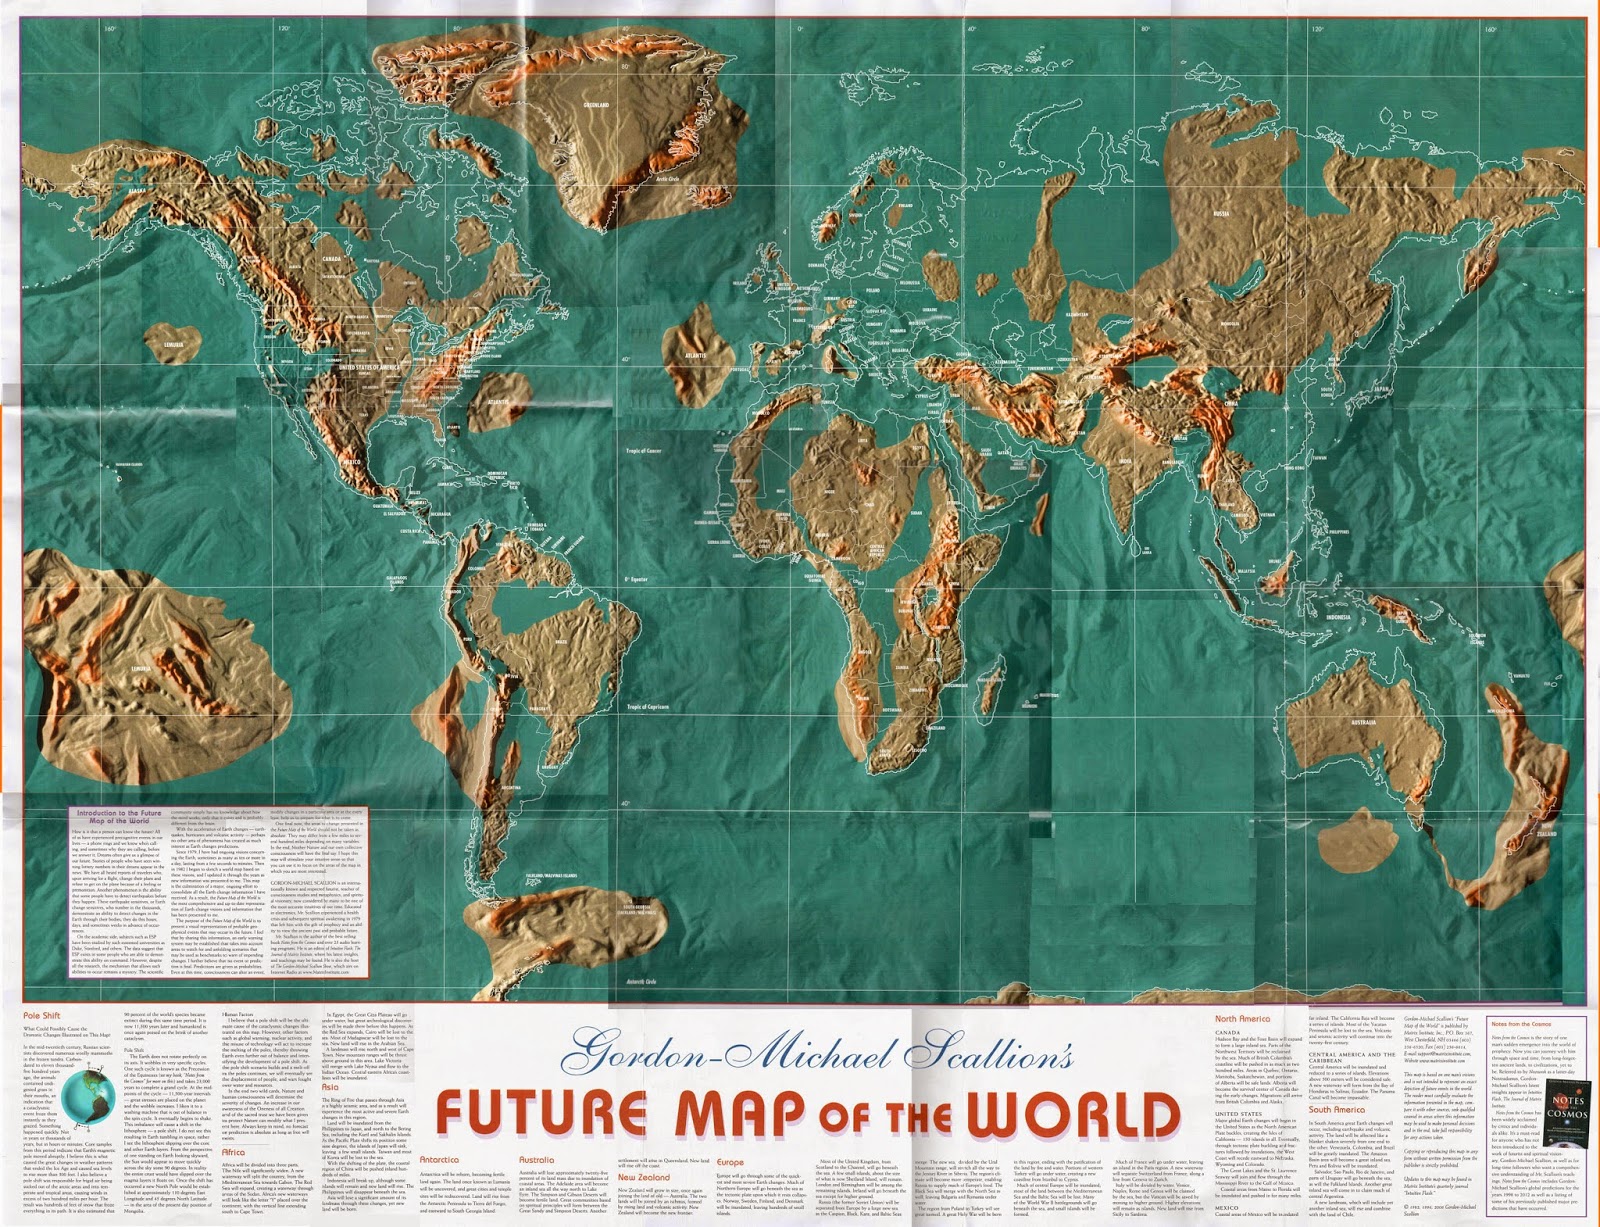 US NAVY MAP of the FUTURE is this NOW?? - THE REAL SIGNS OF TIMES